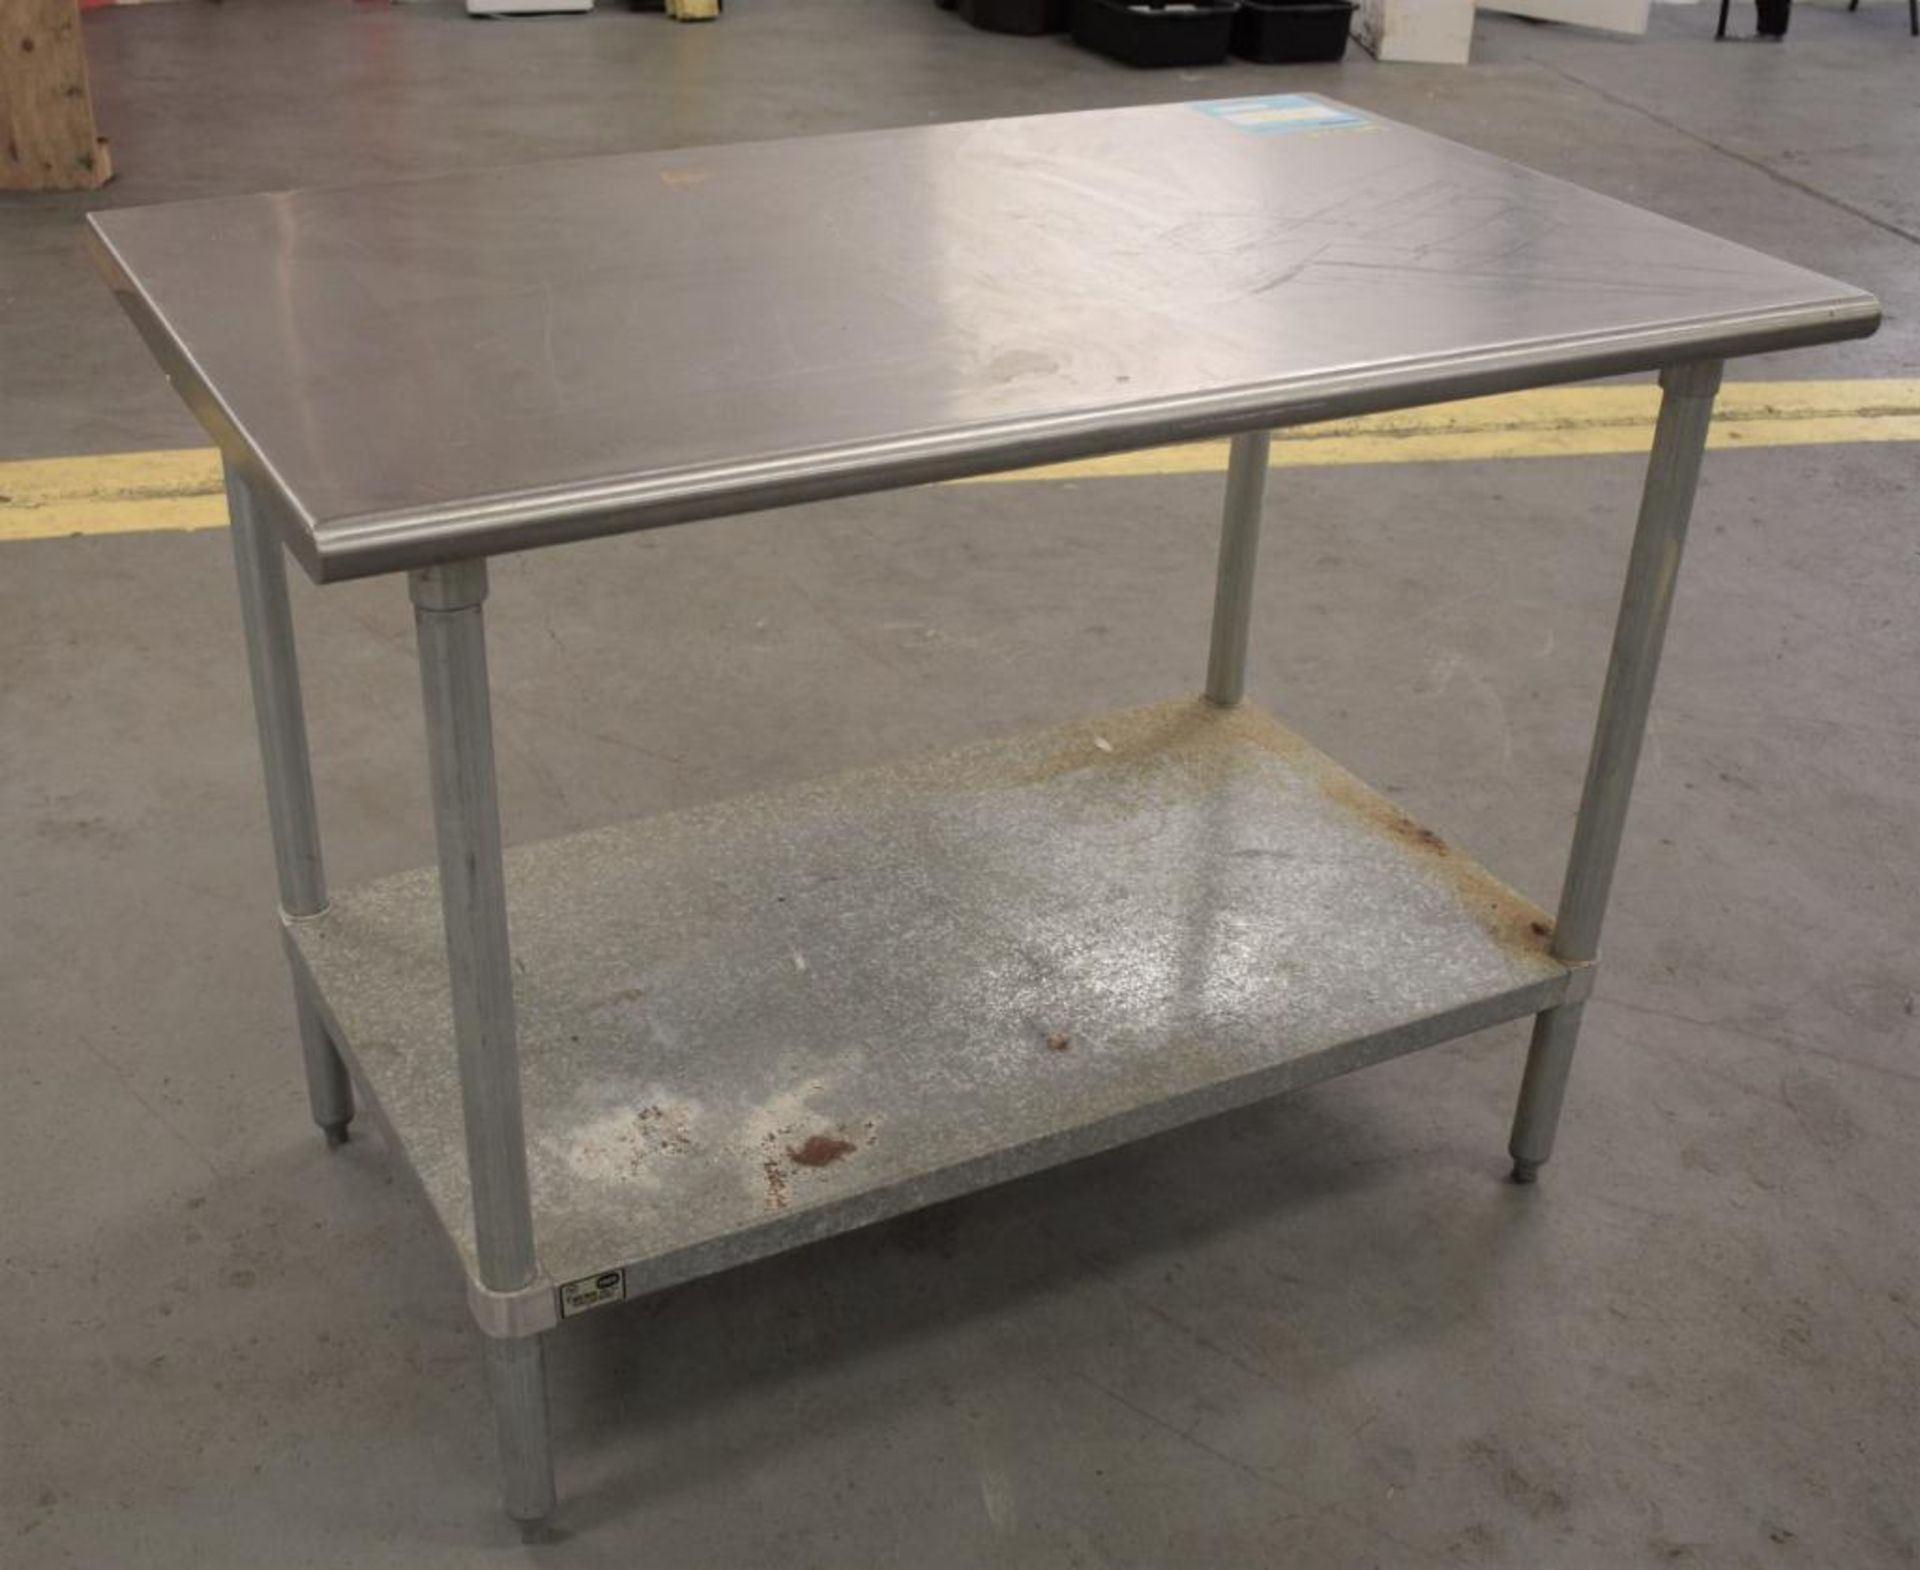 TABCO Stainless Steel Top Table. Approximate 30" wide x 48" long x 36" tall. With bottom shelf and ( - Image 3 of 5